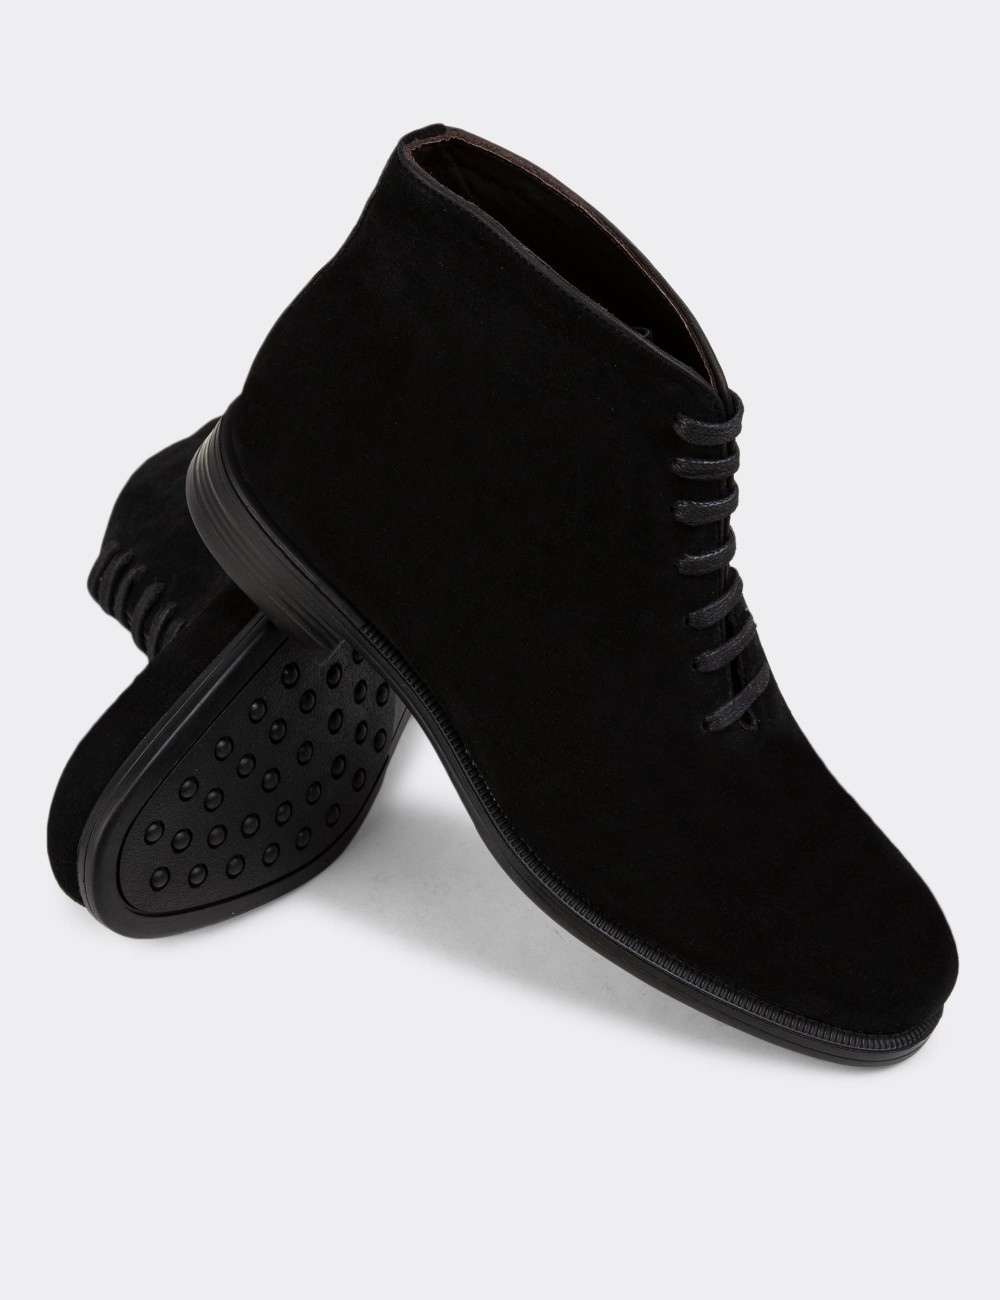 Black Suede Leather Boots - 01918MSYHC02